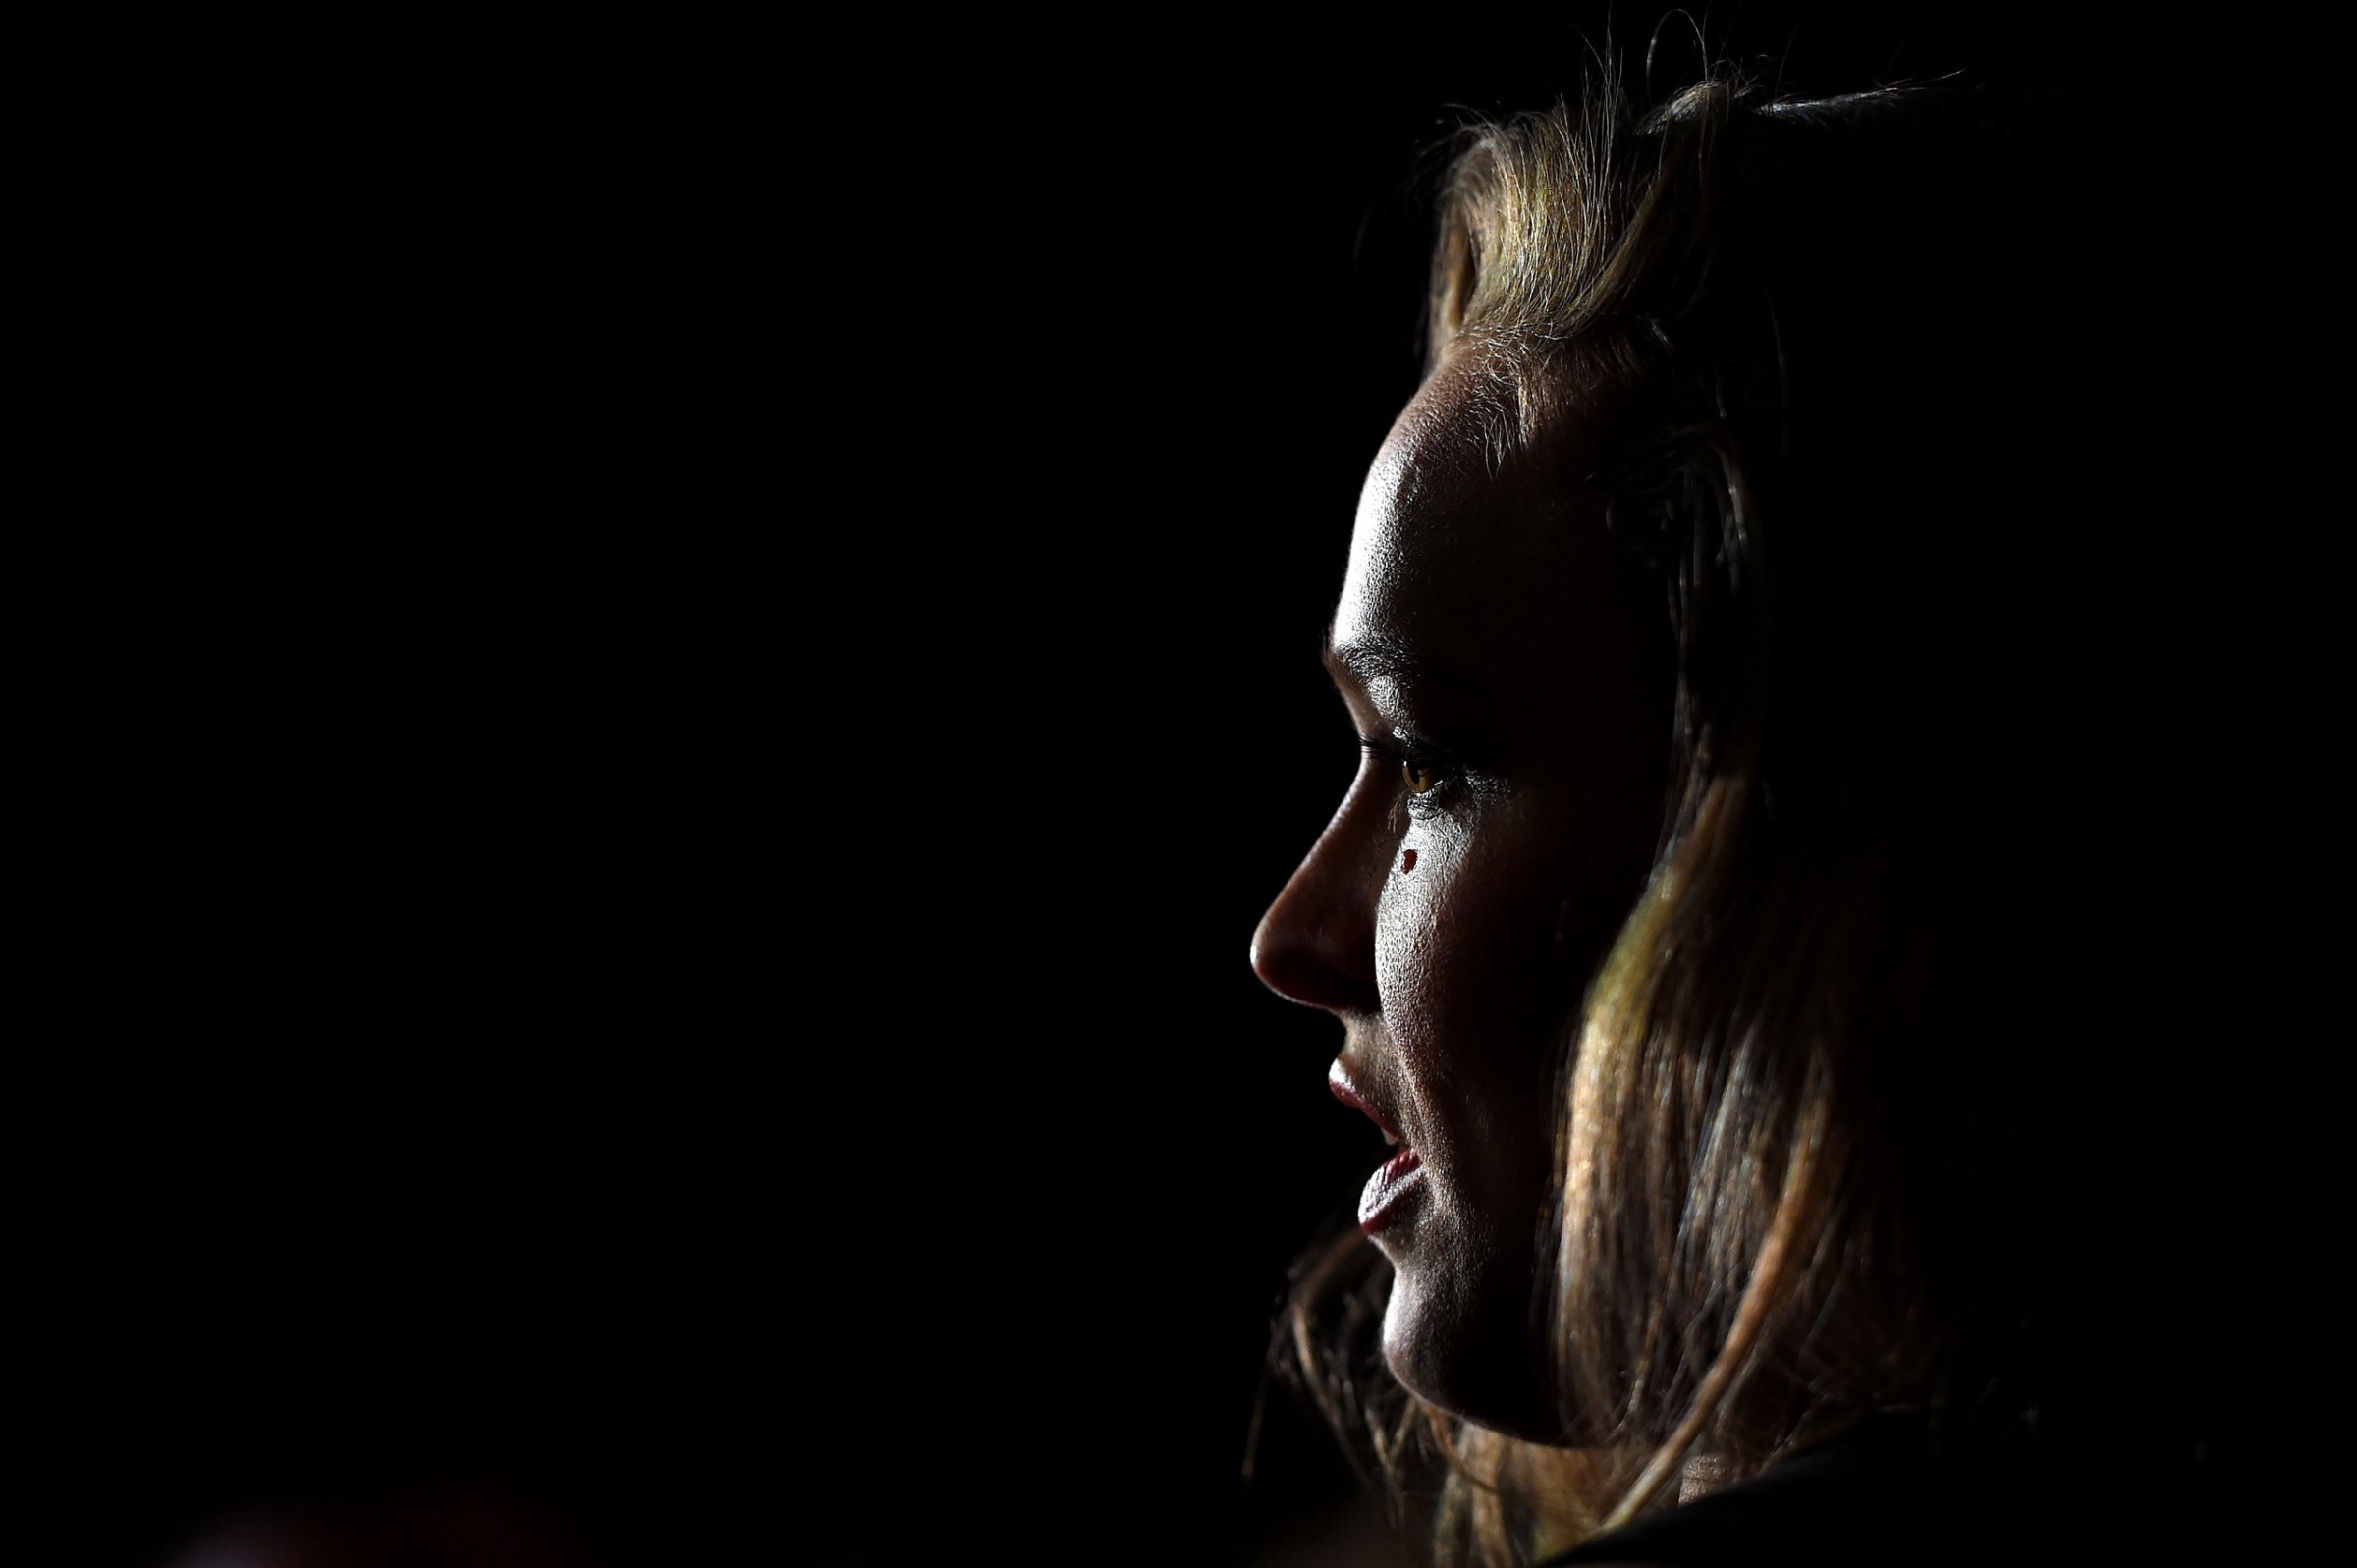 MELBOURNE, AUSTRALIA - NOVEMBER 13: UFC women's bantamweight champion Ronda Rousey of the United States interacts with media during the UFC 193 Ultimate Media Day festivities at Etihad Stadium on November 13, 2015 in Melbourne, Australia. (Photo by Josh Hedges/Zuffa LLC/Zuffa LLC via Getty Images)